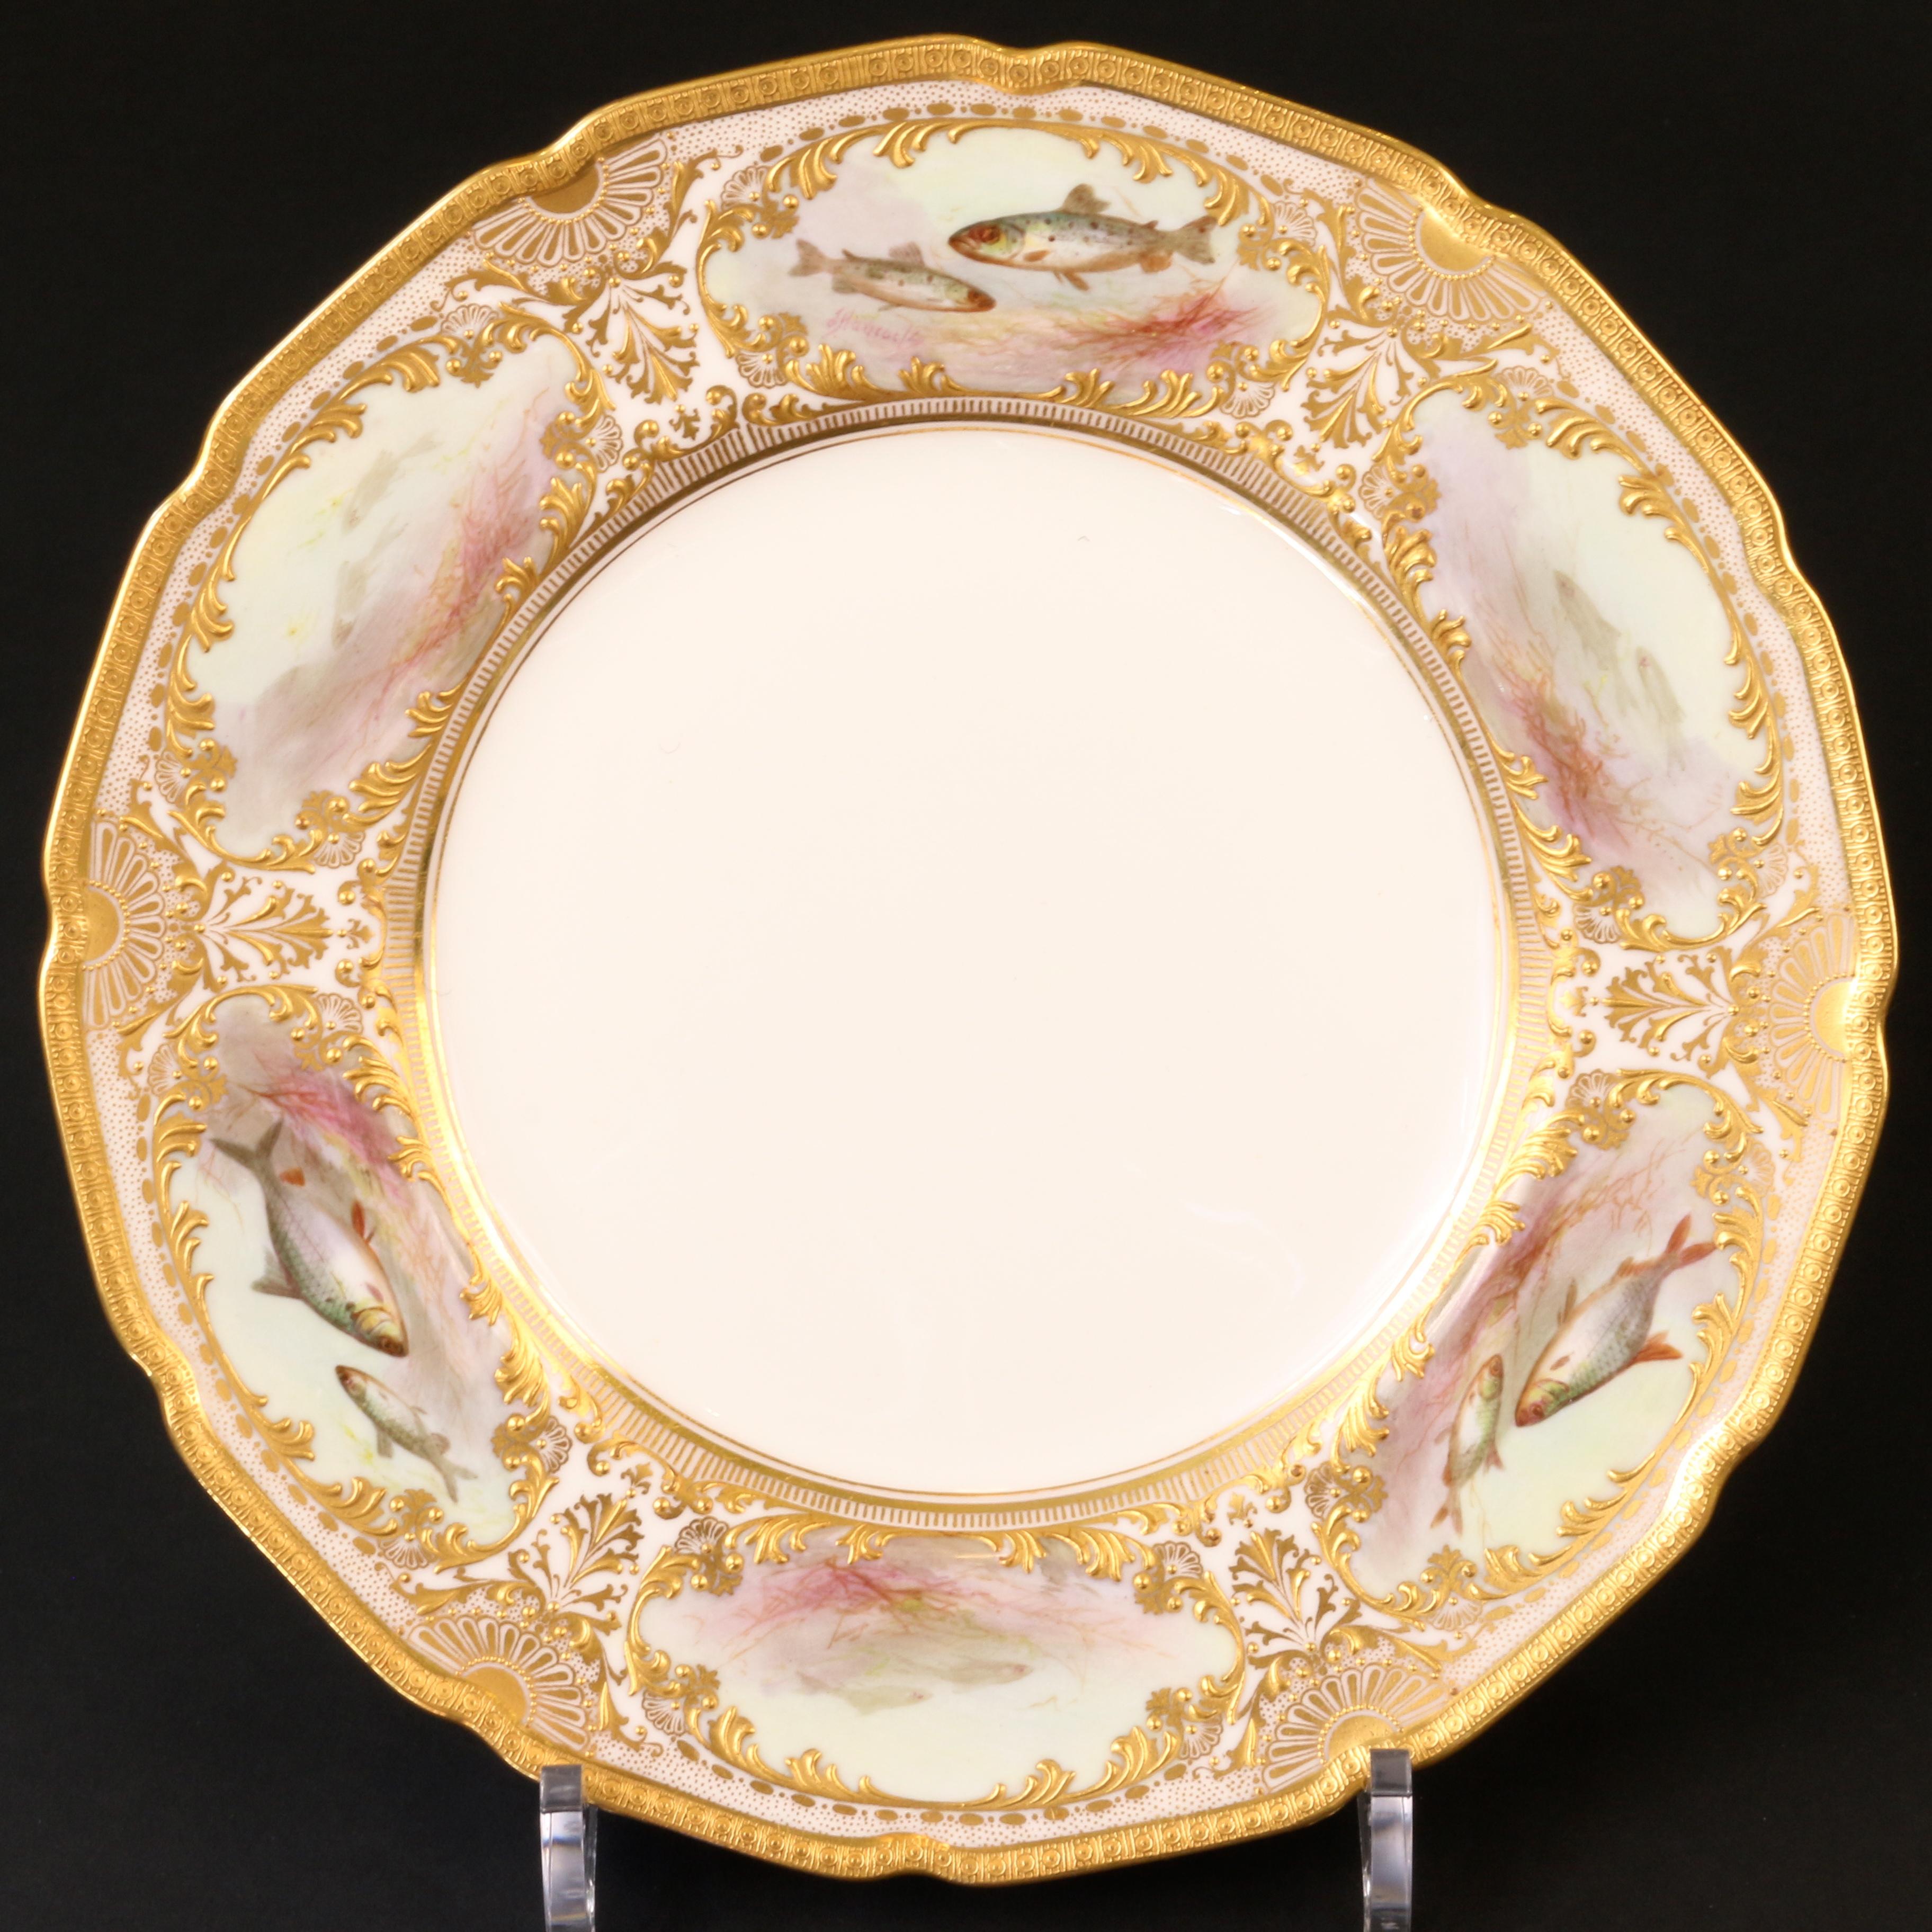 12 Royal Doulton Hand Painted and Heavily Gilded Fish Plates For Sale 7